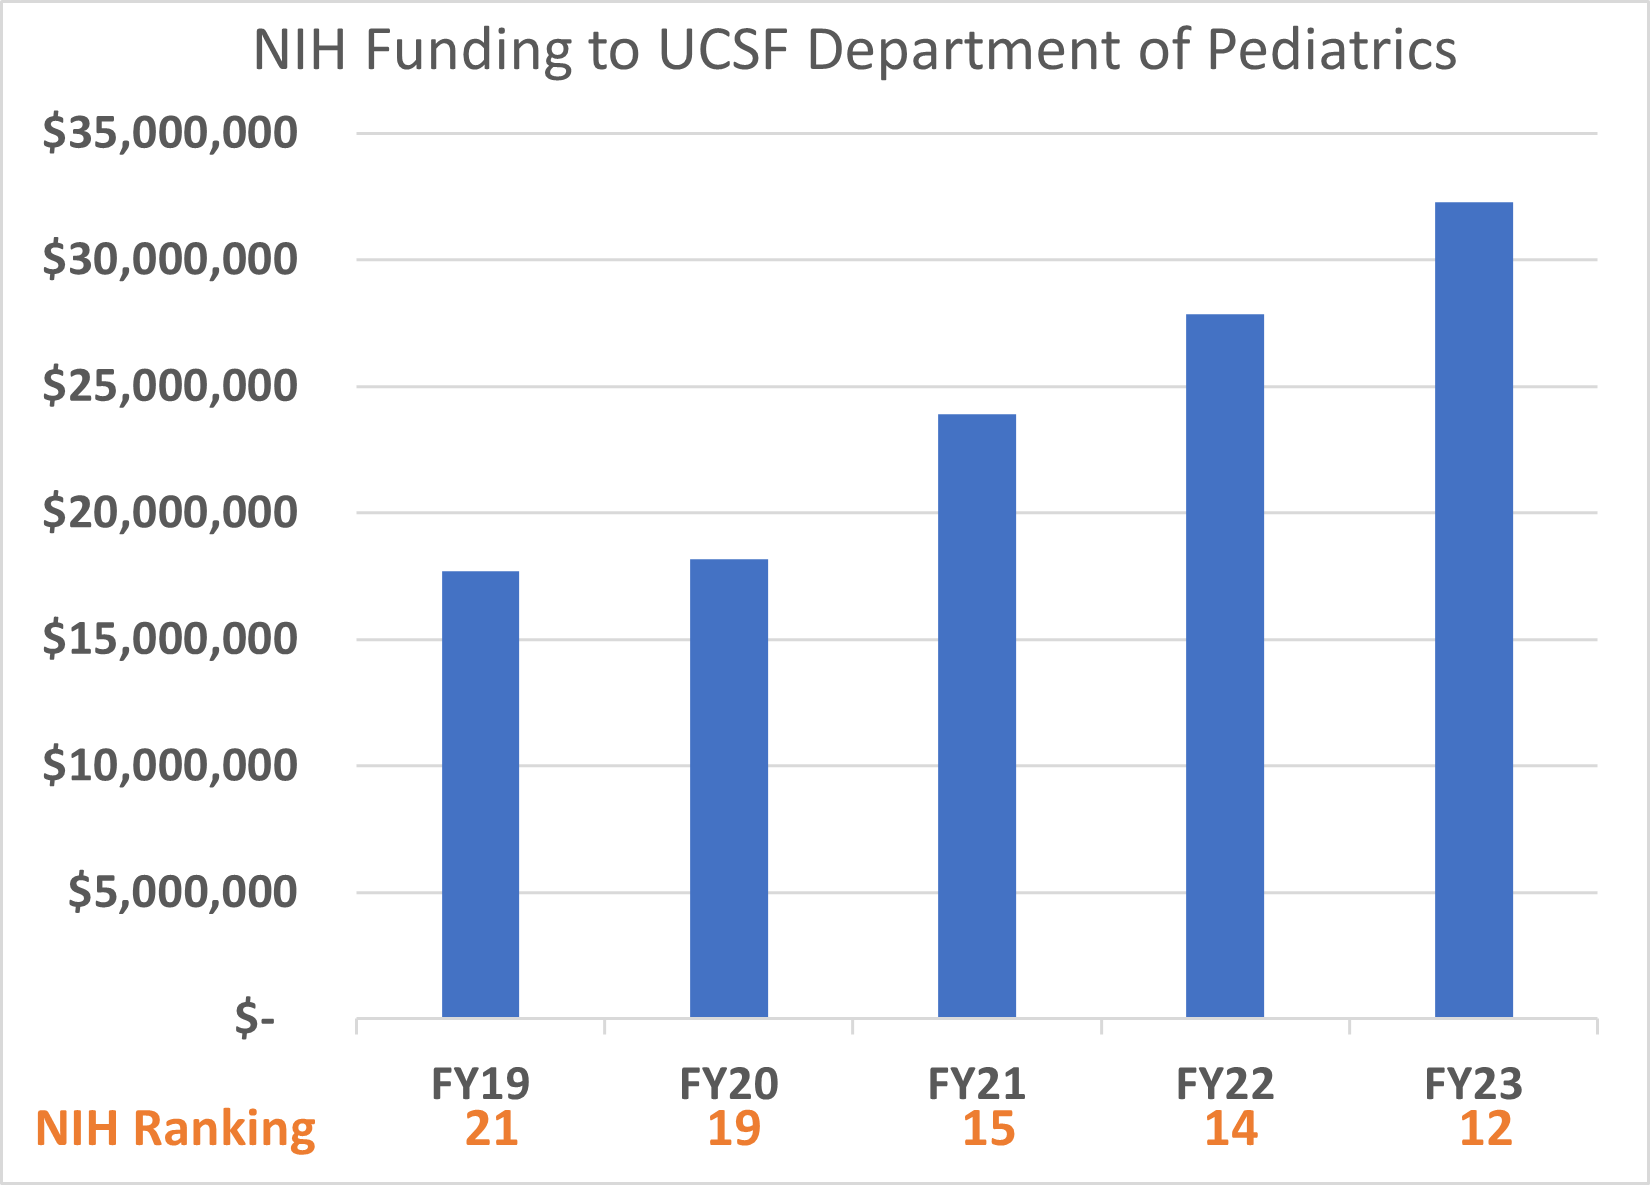 Graph showing year-over-year improvement in NIH funding to the UCSF Department of Pediatrics